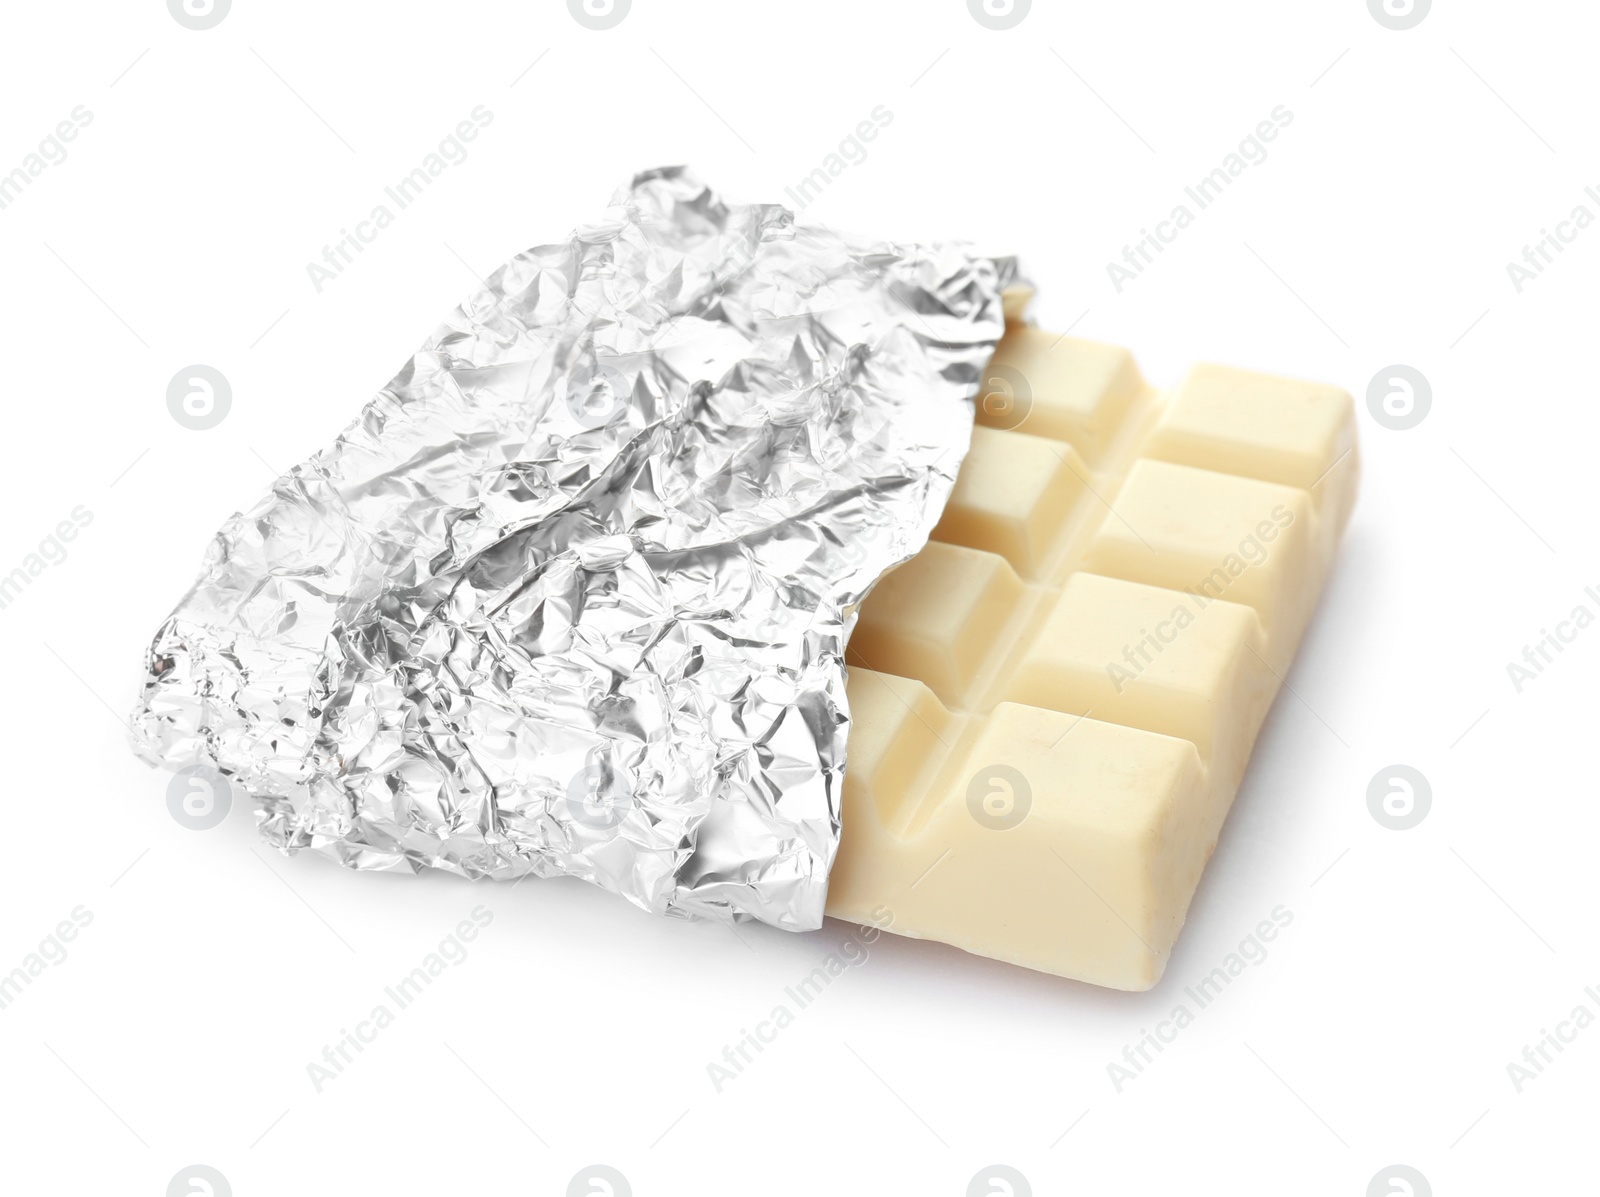 Photo of Delicious chocolate bar in foil on white background